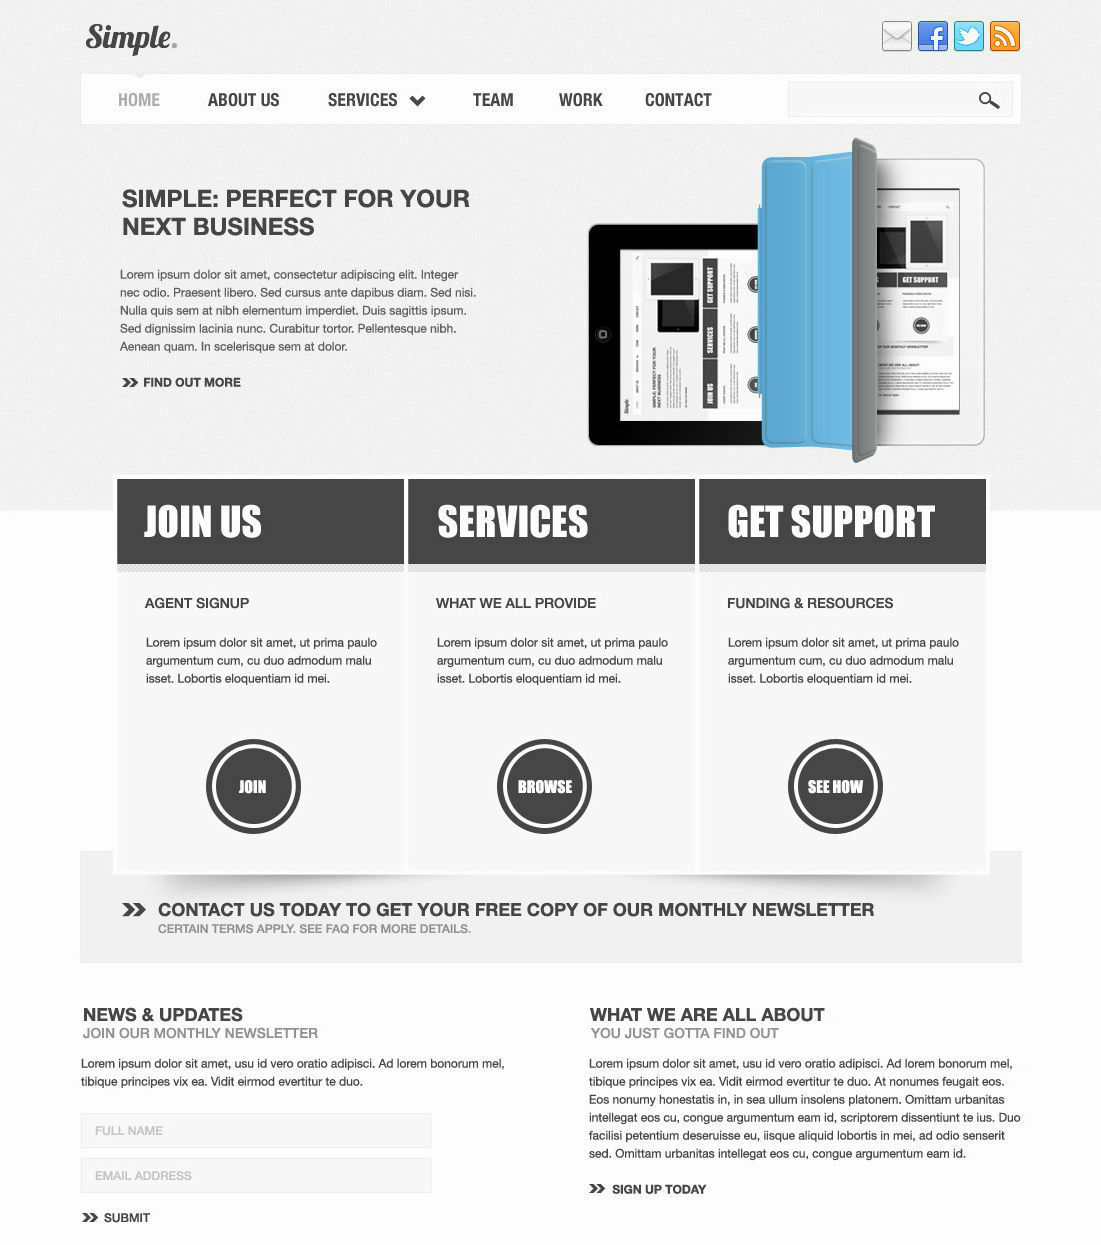 Шаблон html страницы. About us html Template. Simple html Templates. About Page Template html. Terms apply